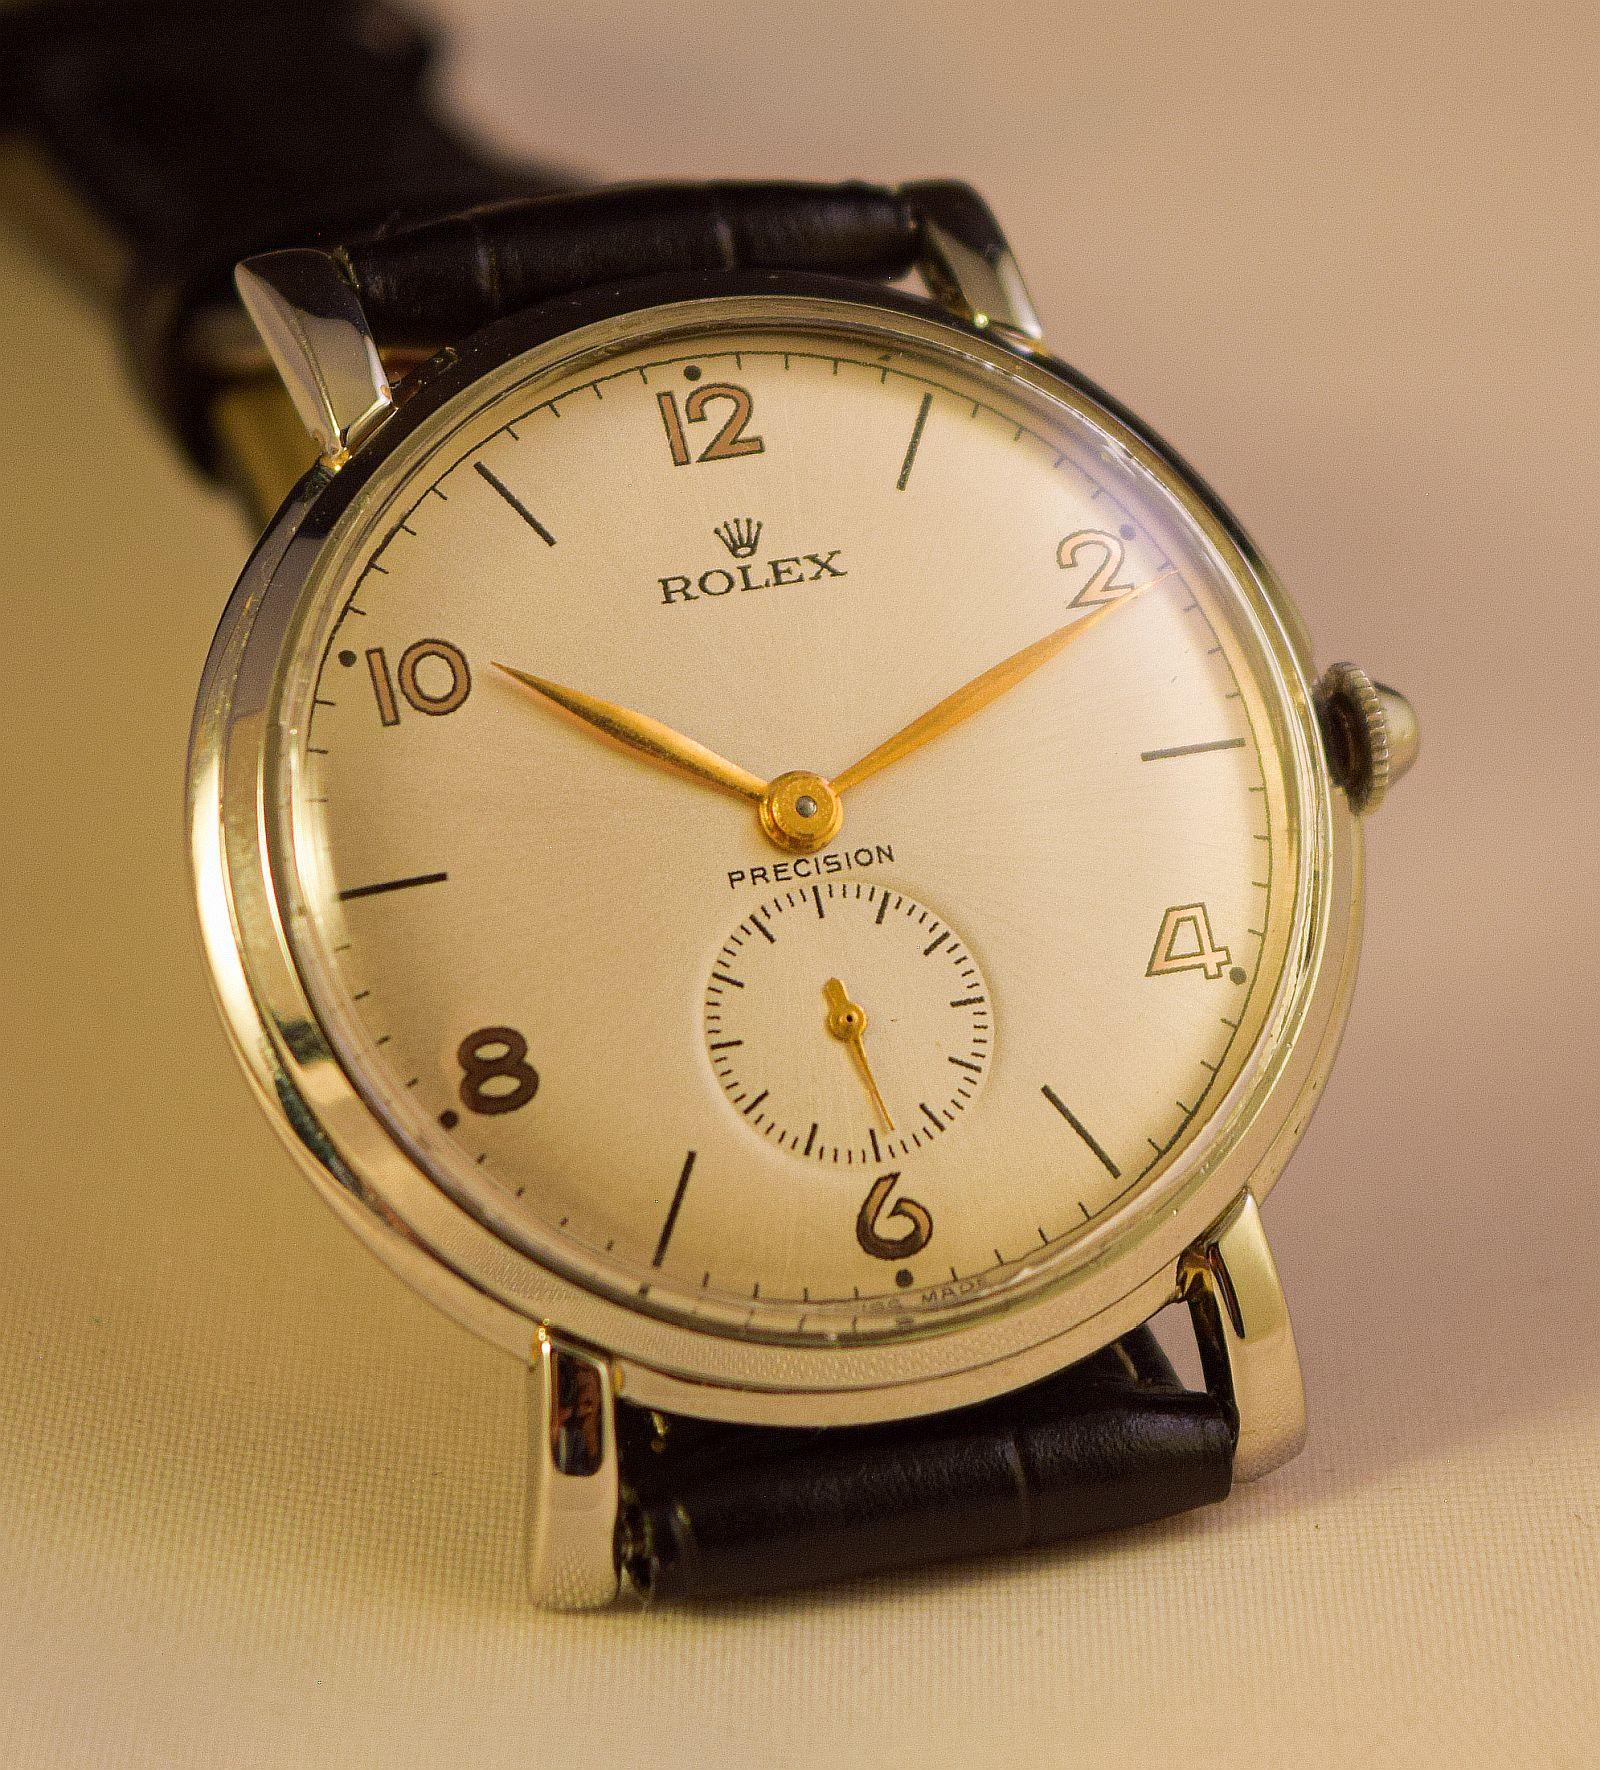 Rolex Ref 4224
Very rare steel cased oversize-Jumbo-Rolex watch
with beautiful unusual lugs.1950's
Tear drop lugs
This watch is a Collectors dream.
Original winder-associated original Rolex steel buckle.
We have fitted a real leather strap as the